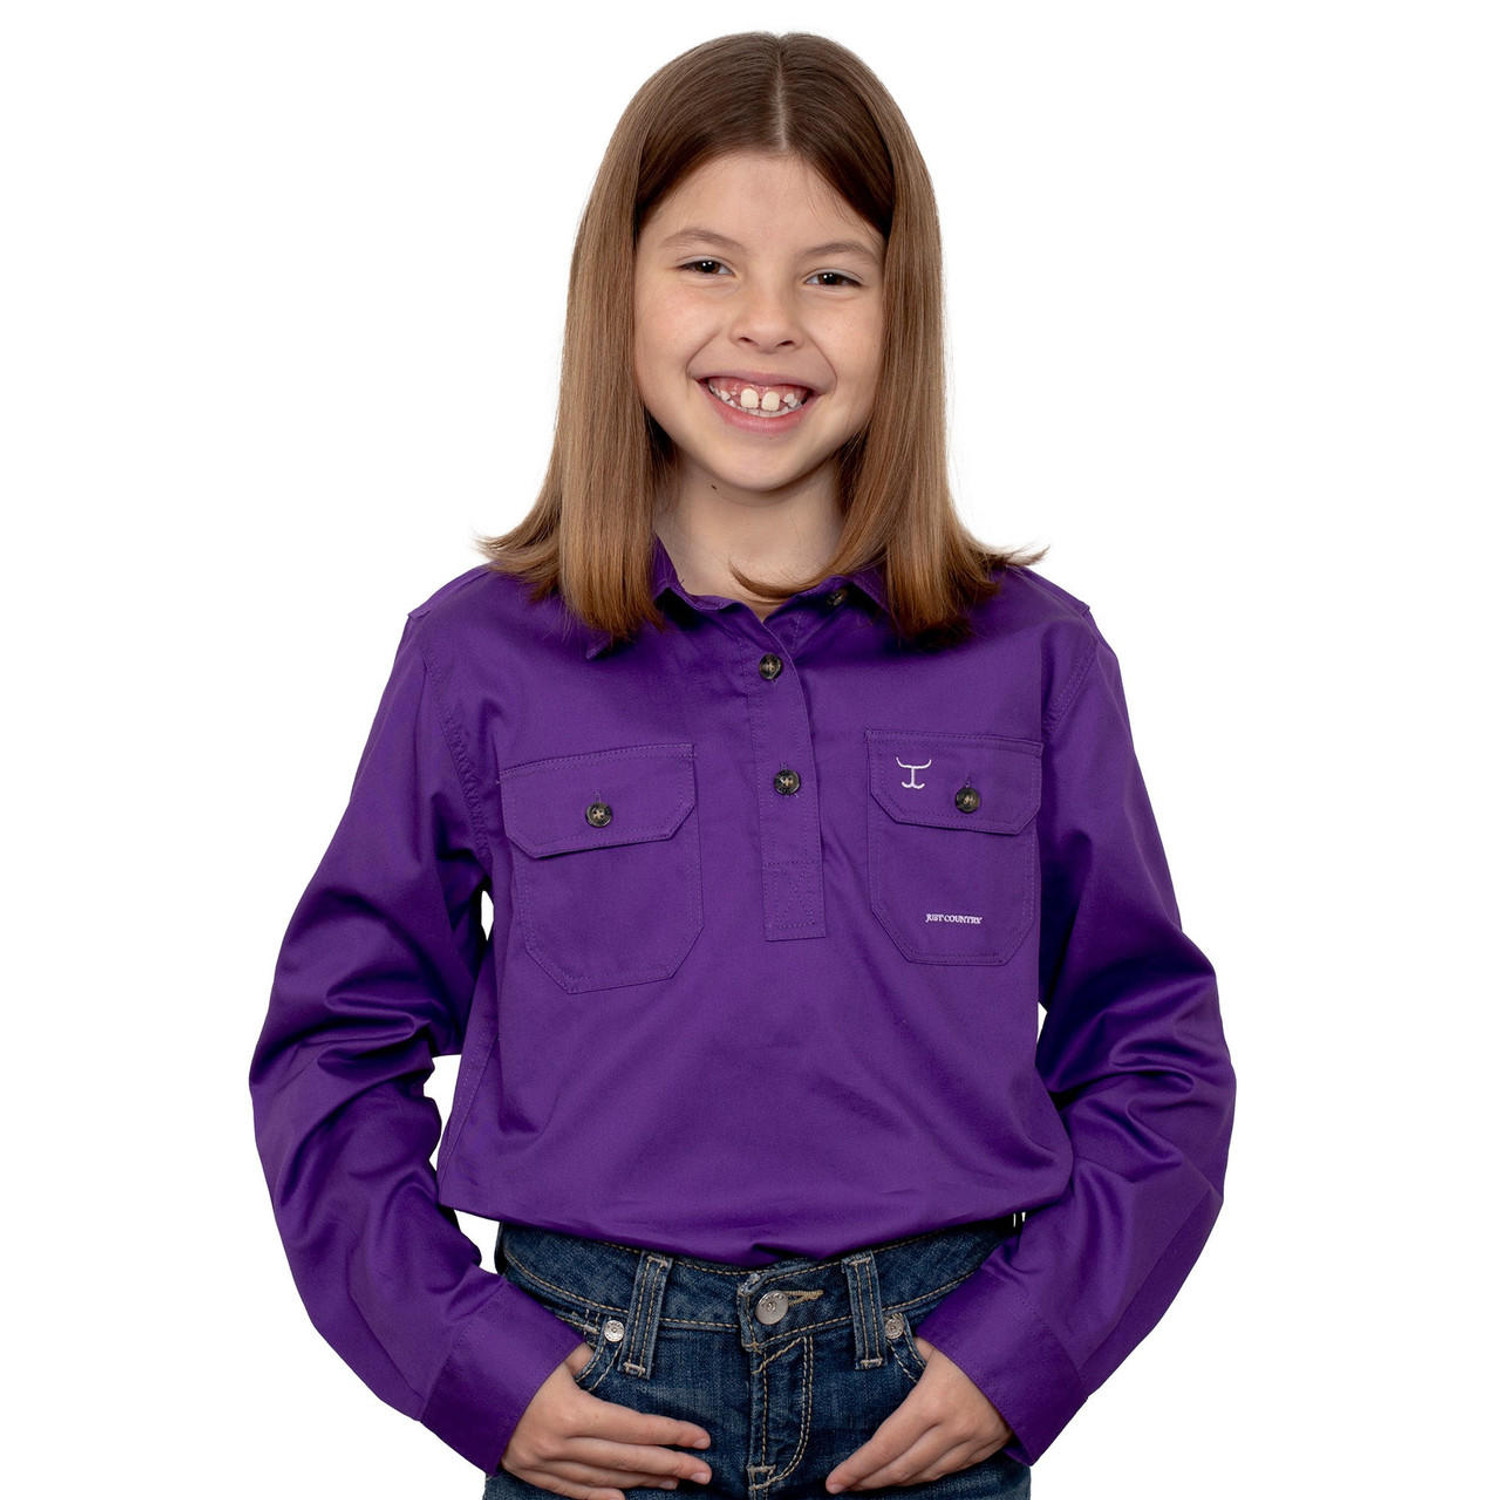 Just Country 60606 KIDS Kenzie Longsleeve Closed Front Shirt in Purple Bulk Buy Deal, Buy 4 or more Just Country Kids Shirts for dollar39.95 Each